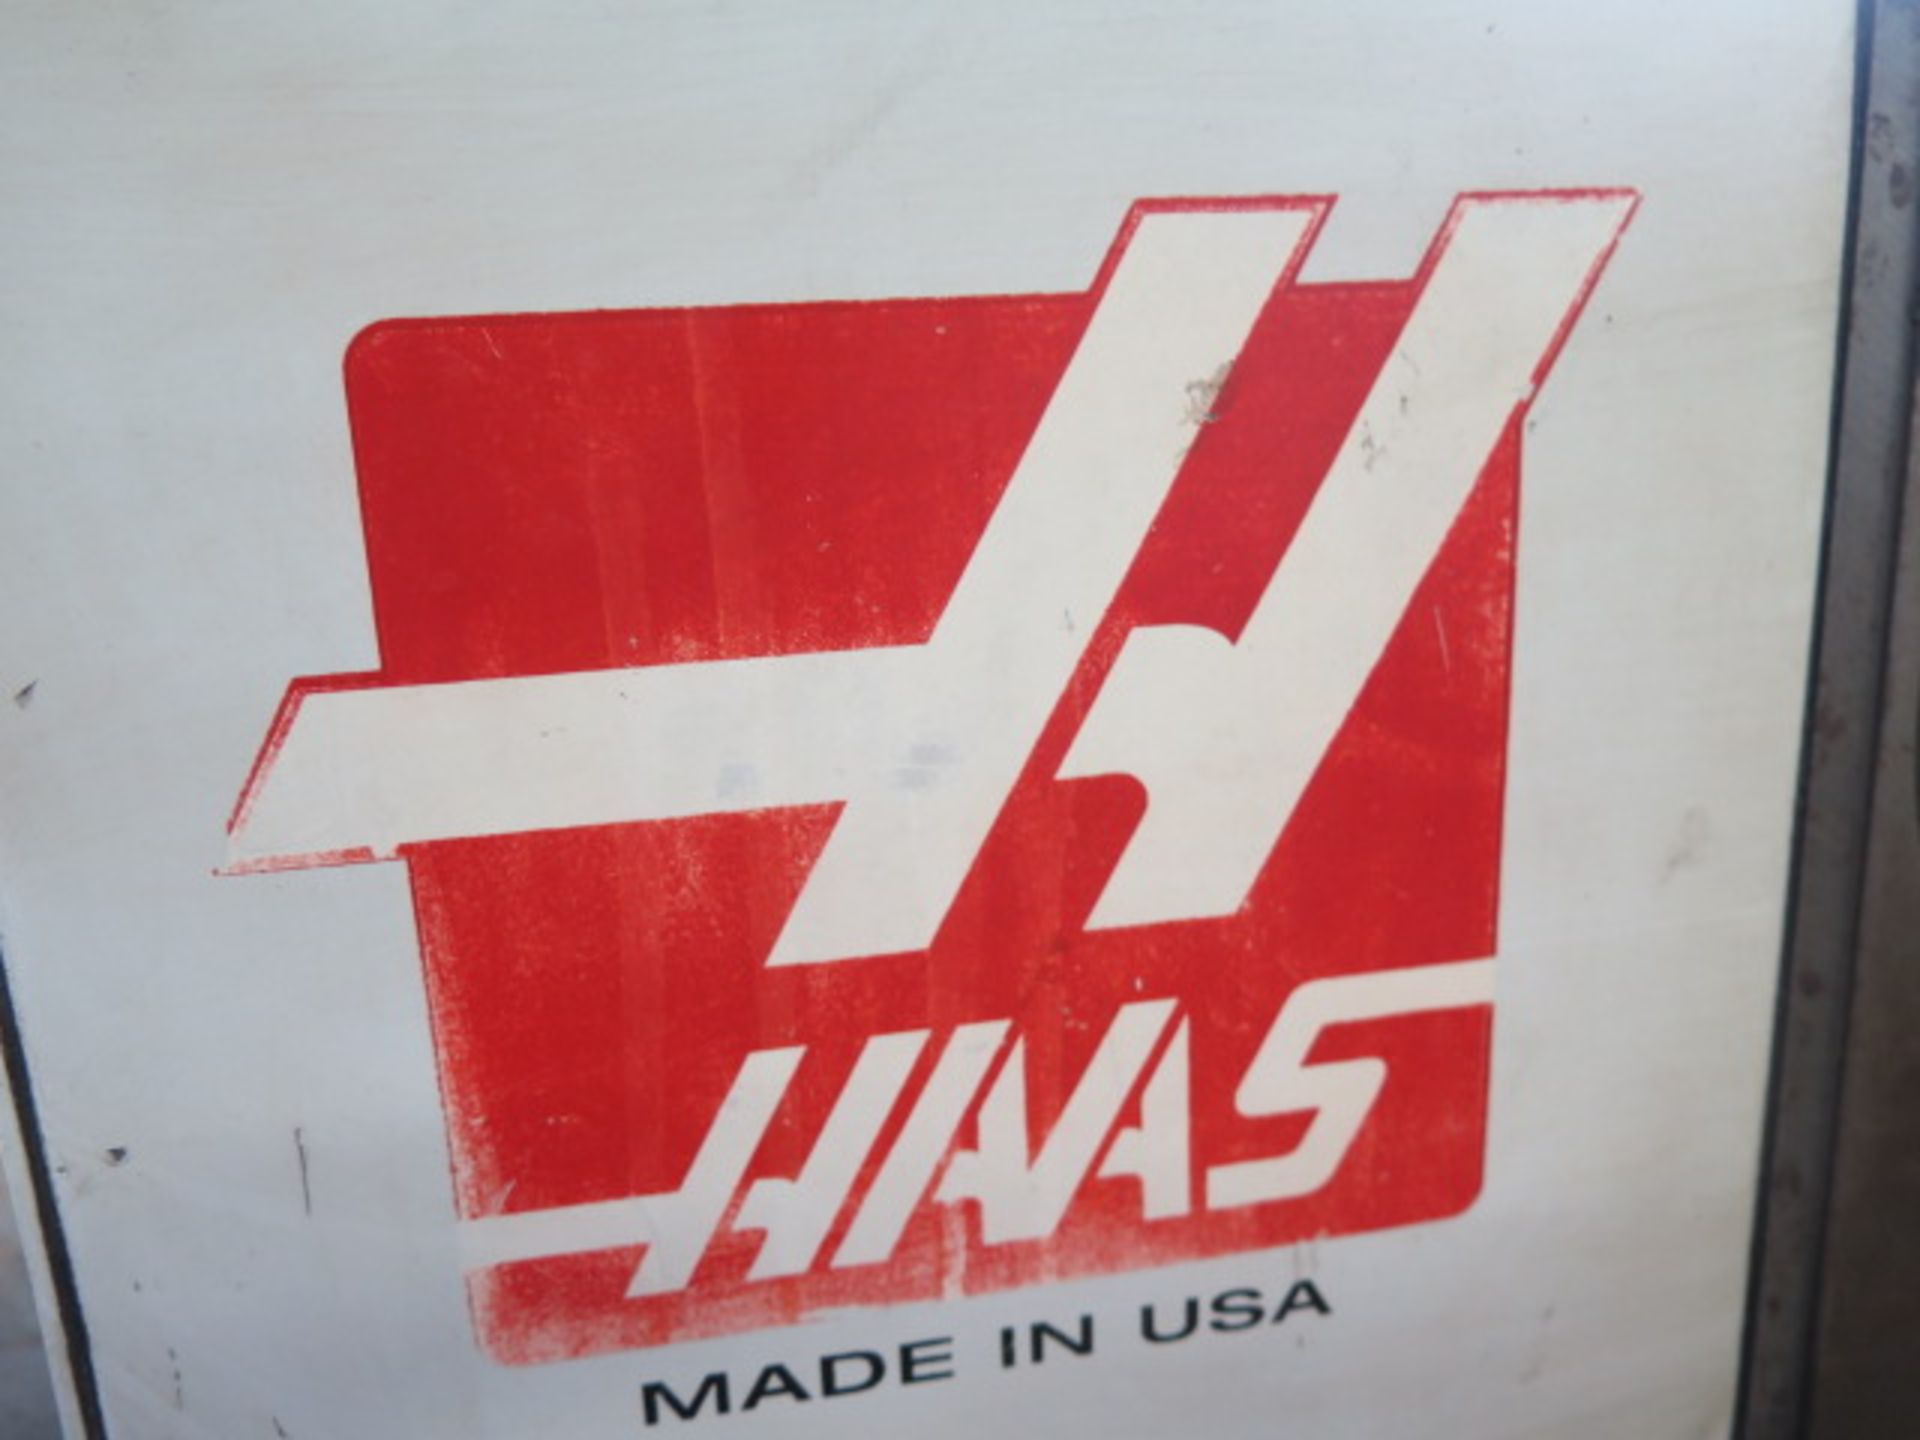 Haas HRT160H 6” 4th Axis Rotary Indexer s/n 163567 (Change Parameter #45 VALUE from “0” to “16384”) - Image 5 of 9